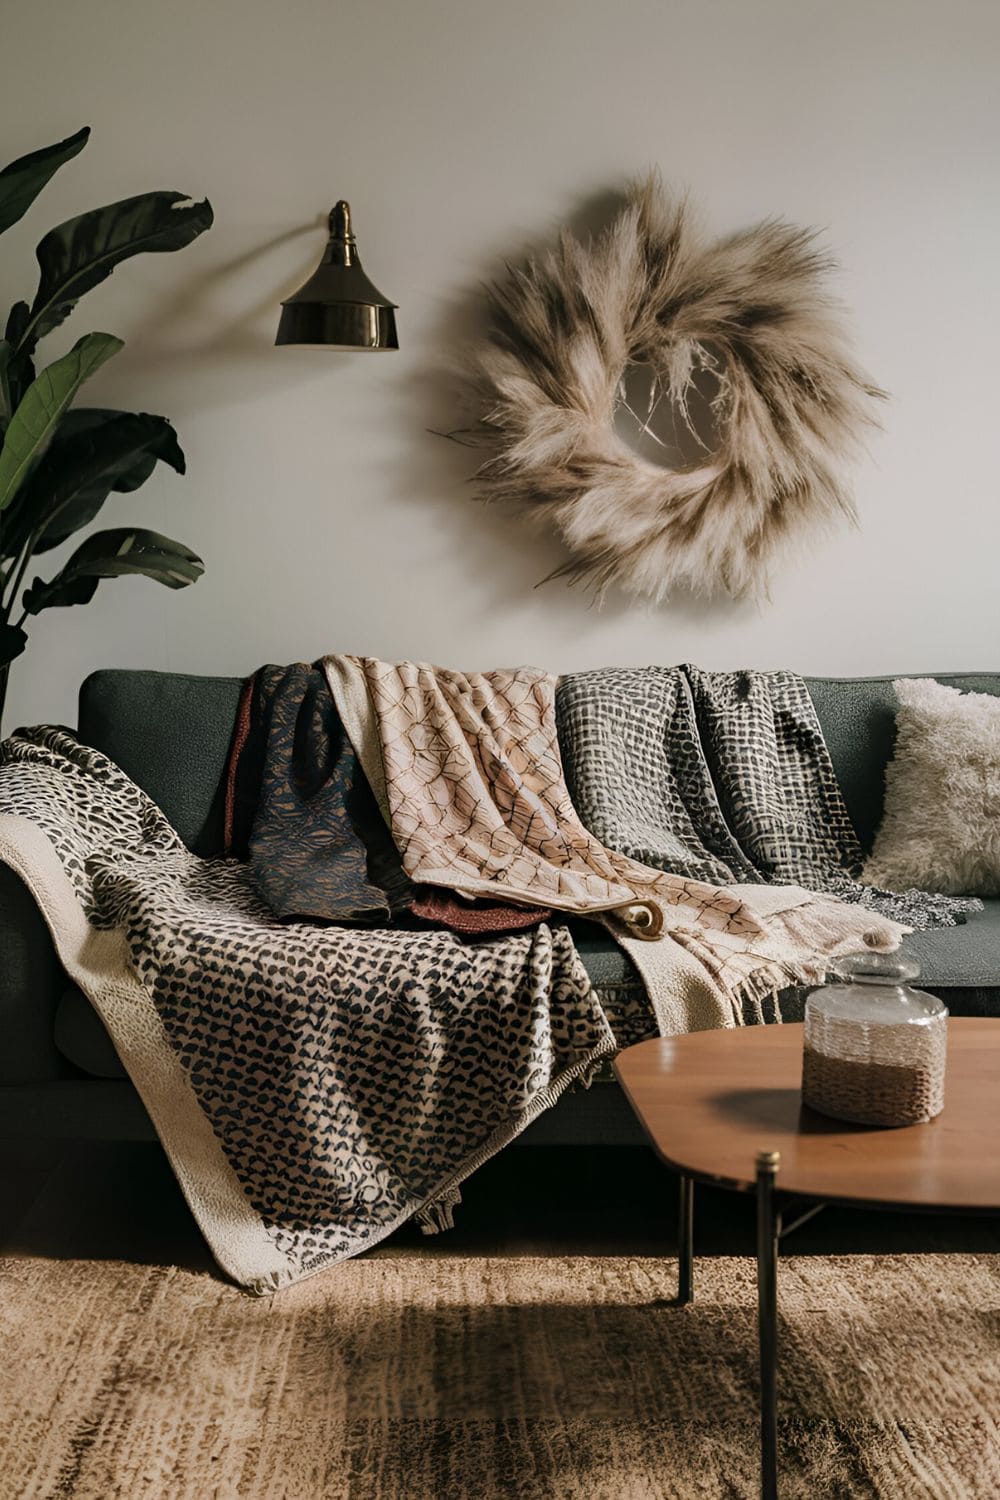 Sofa draped with multiple throw blankets in different patterns and materials